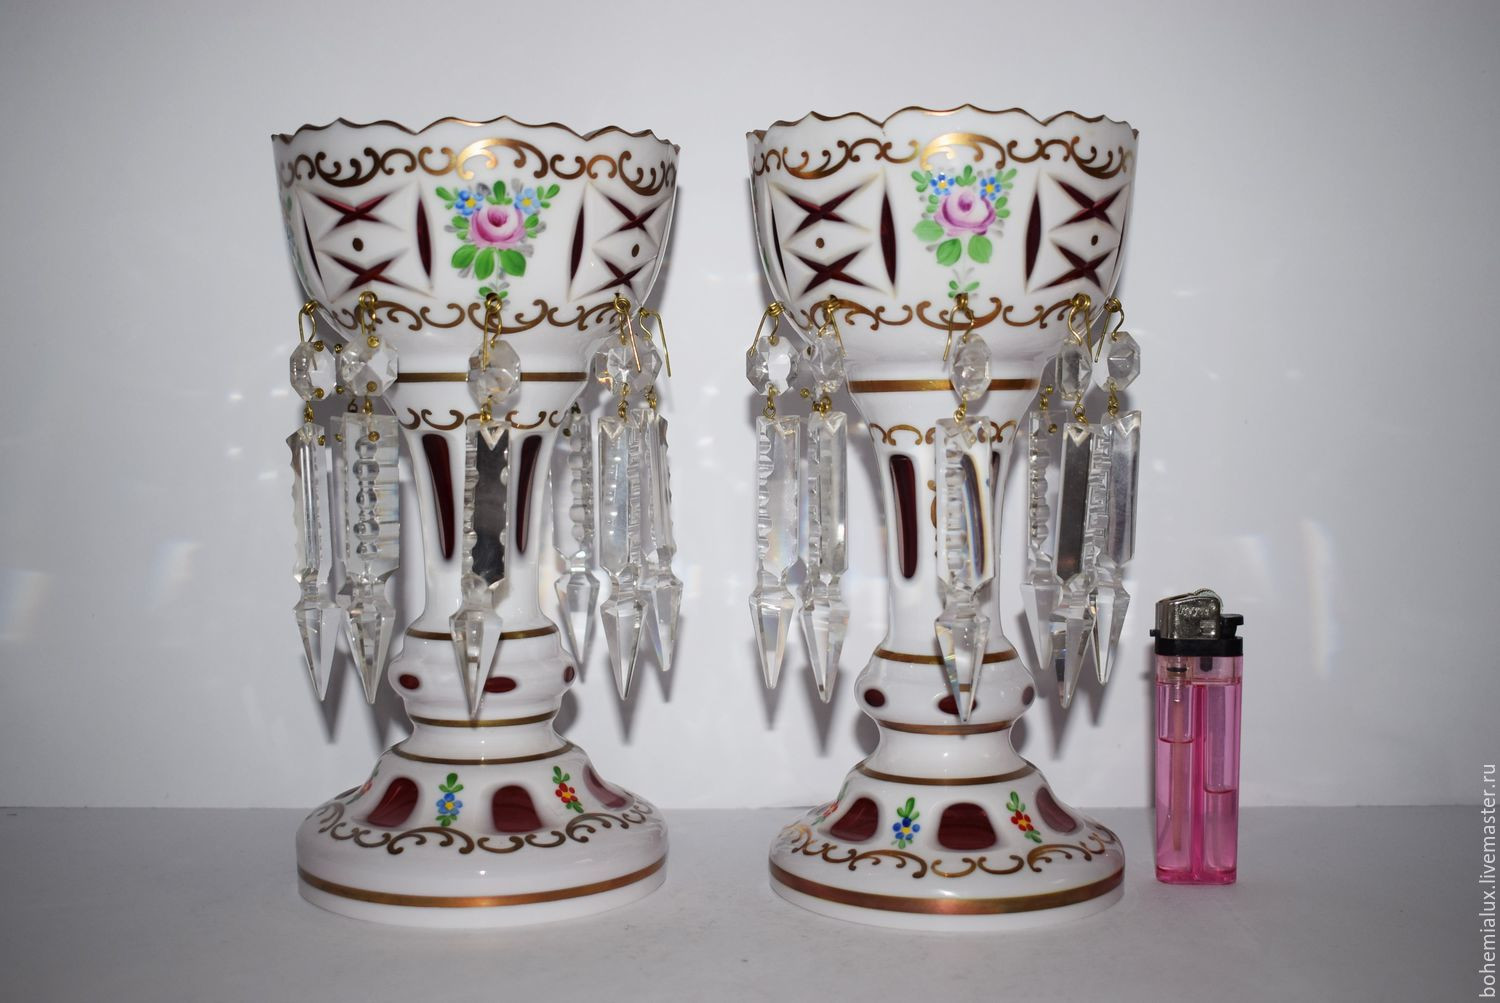 24 Spectacular Bohemia Czech Republic Lead Crystal Vase 2024 free download bohemia czech republic lead crystal vase of two decorative vases double layered glass painting pre war shop for two decorative vases double layered glass painting pre war bohemialux